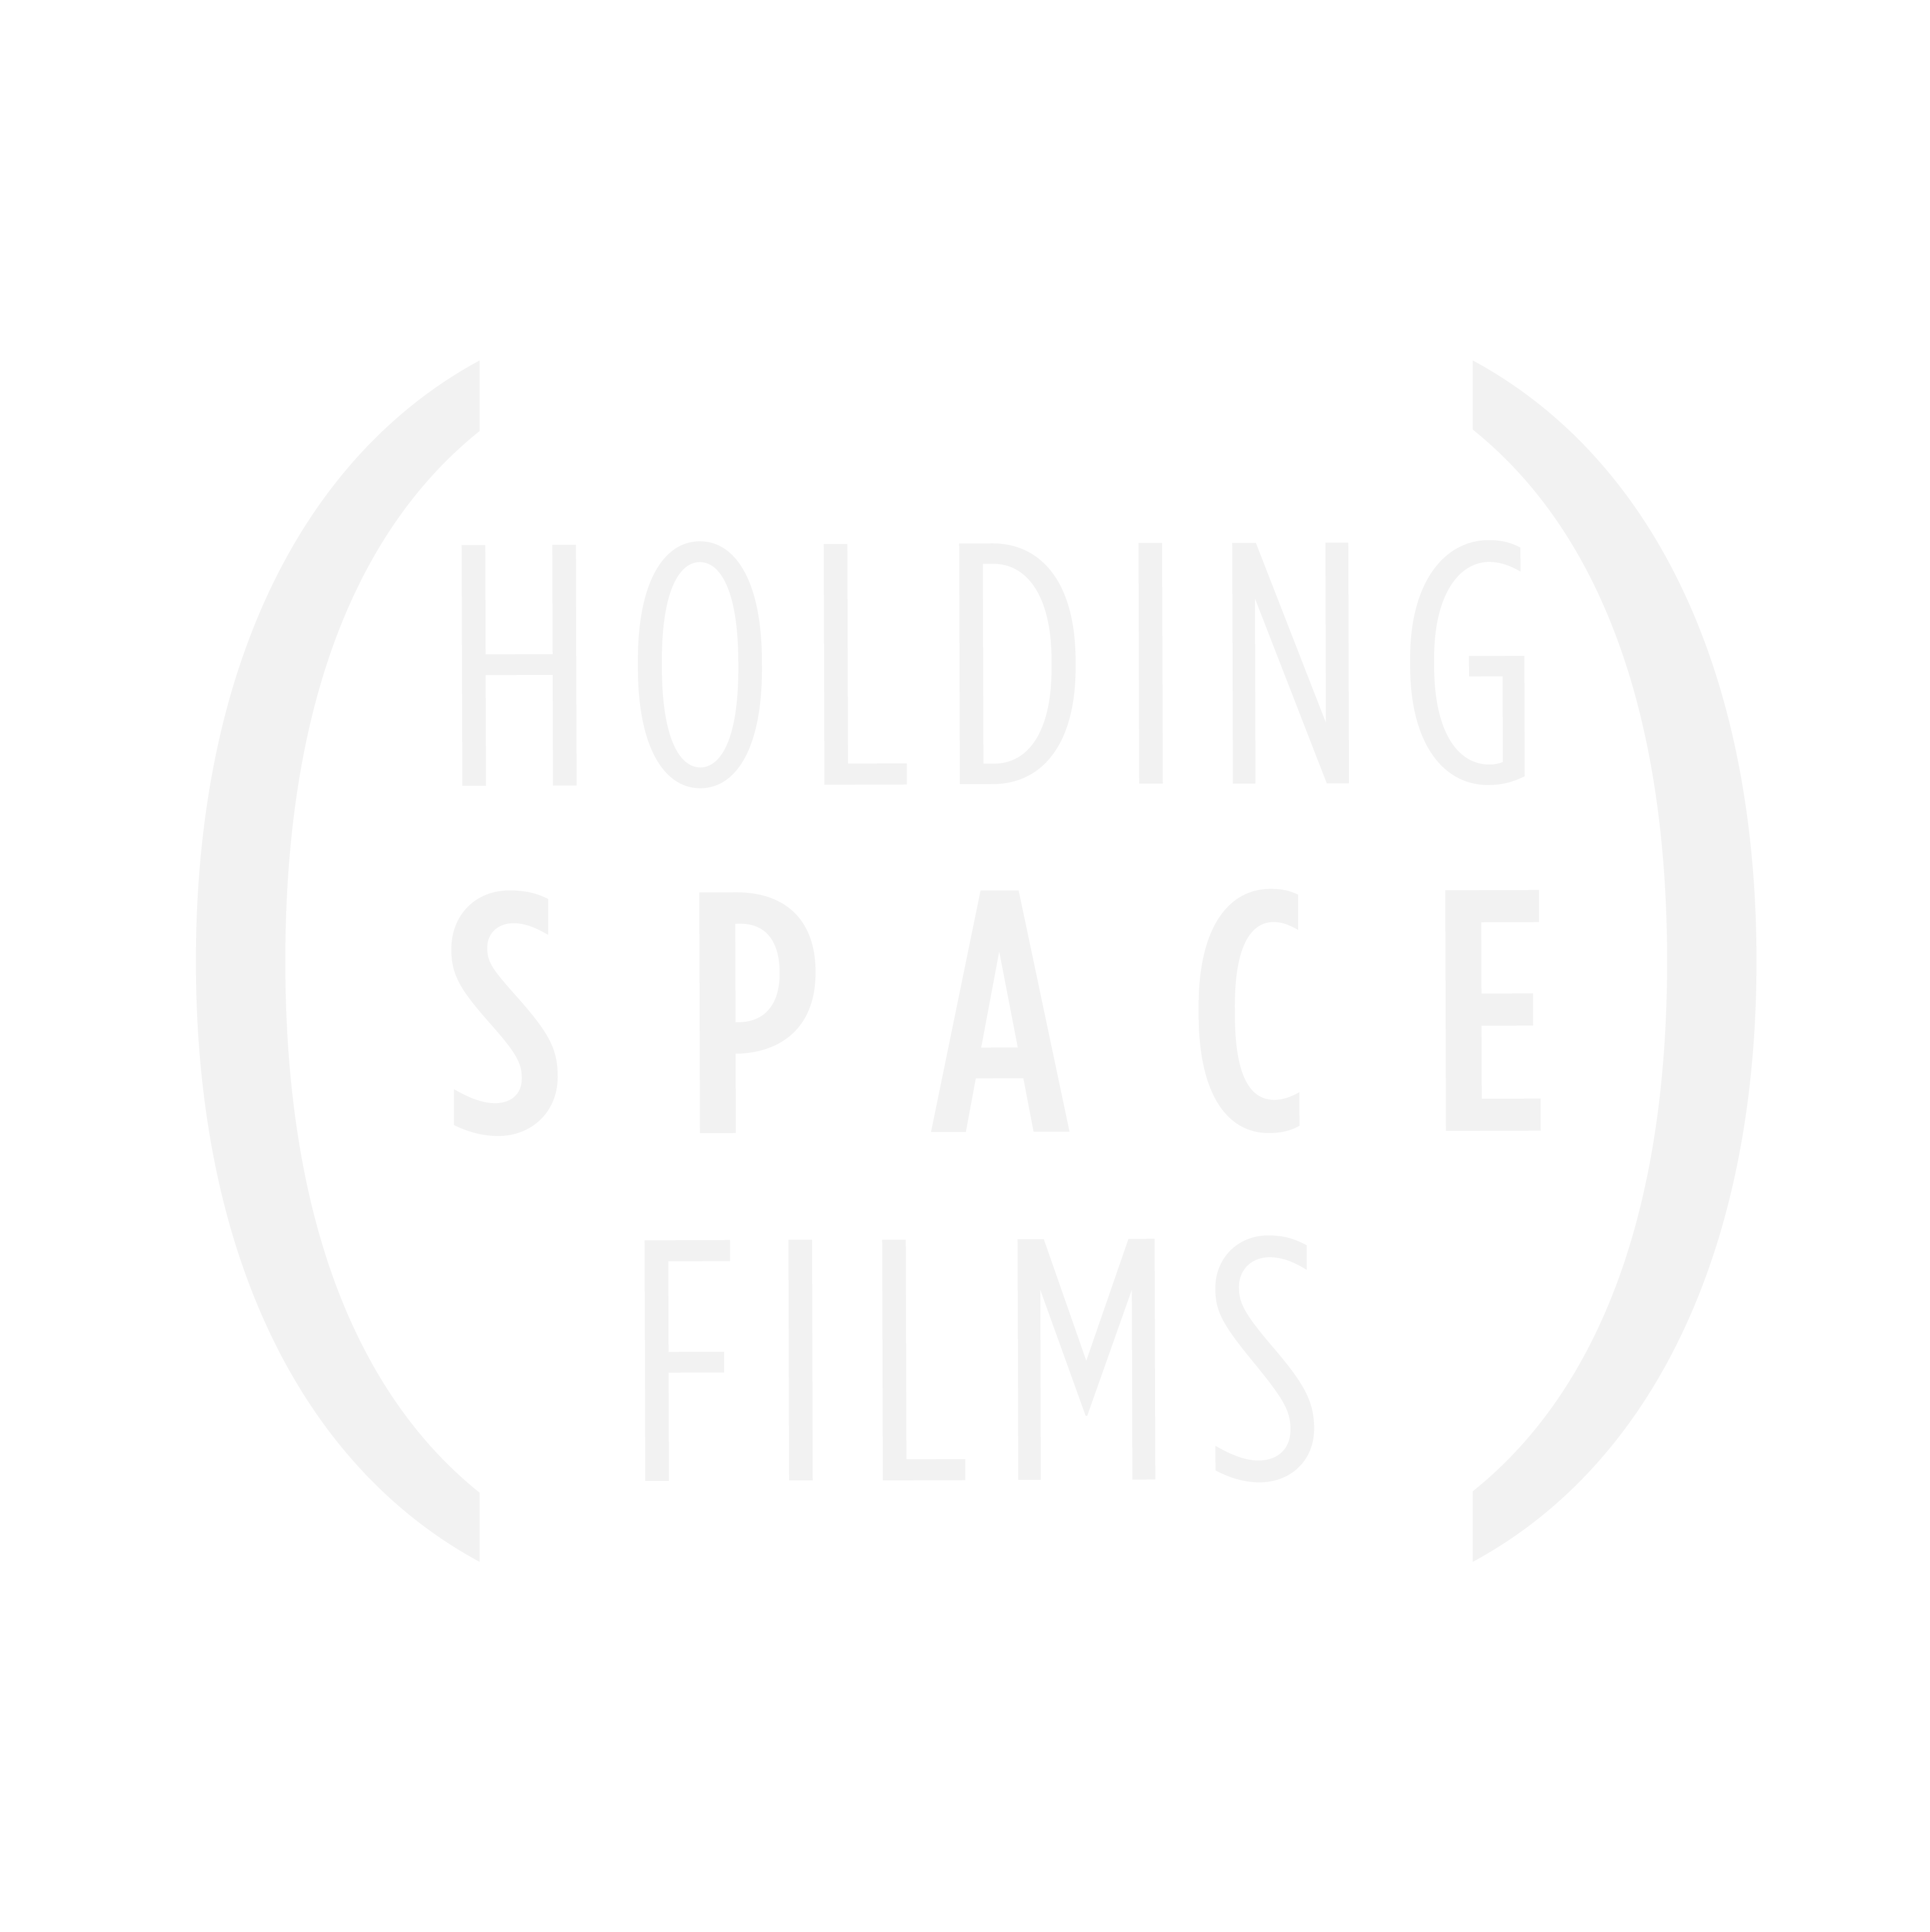 Holding Space Films